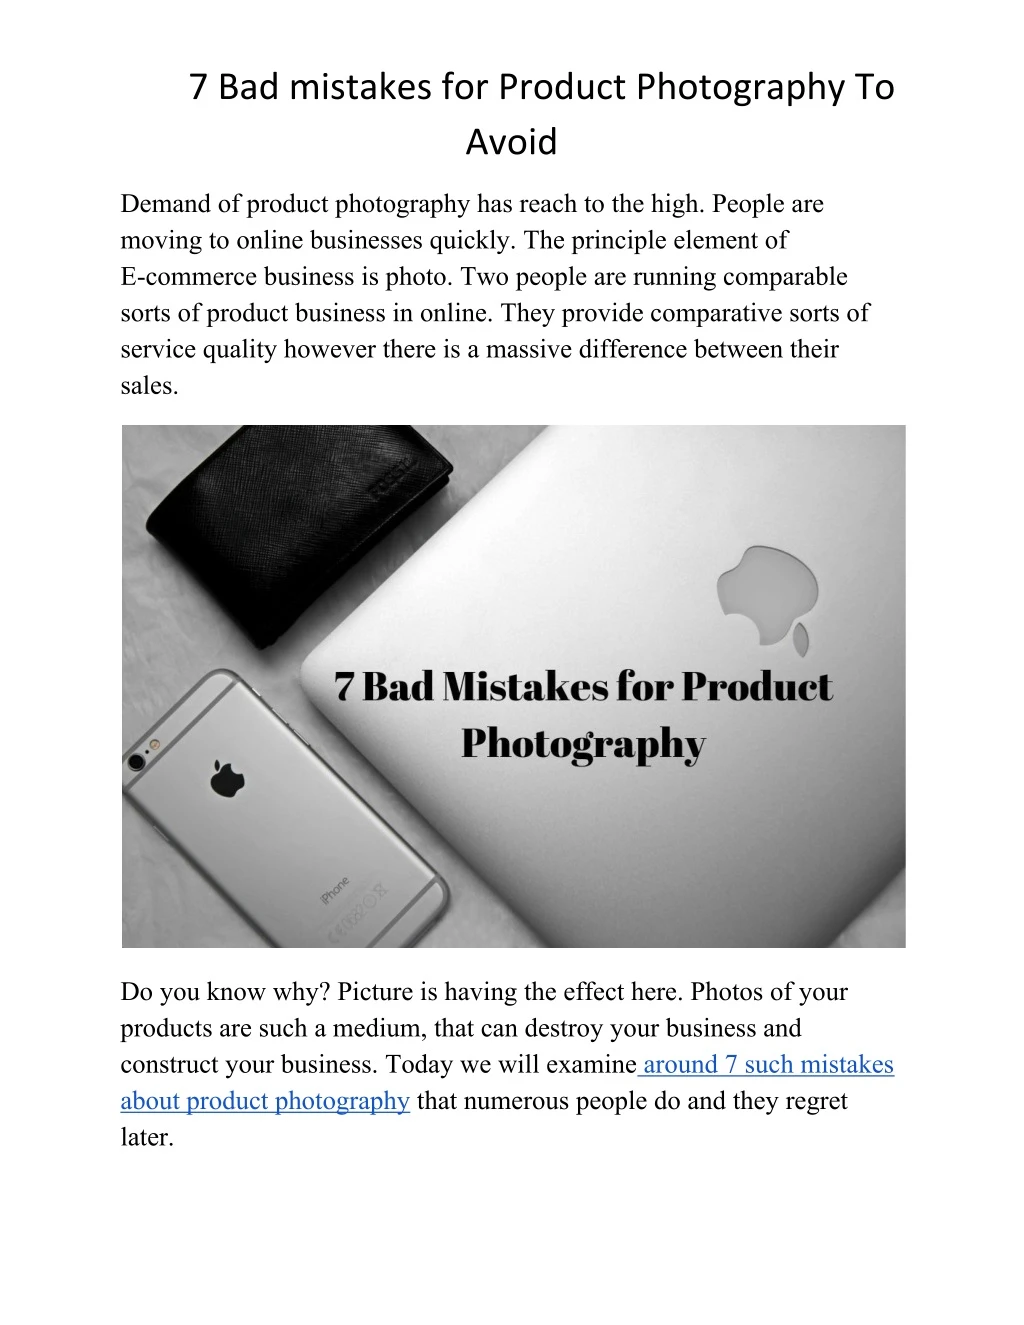 7 bad mistakes for product photography to avoid